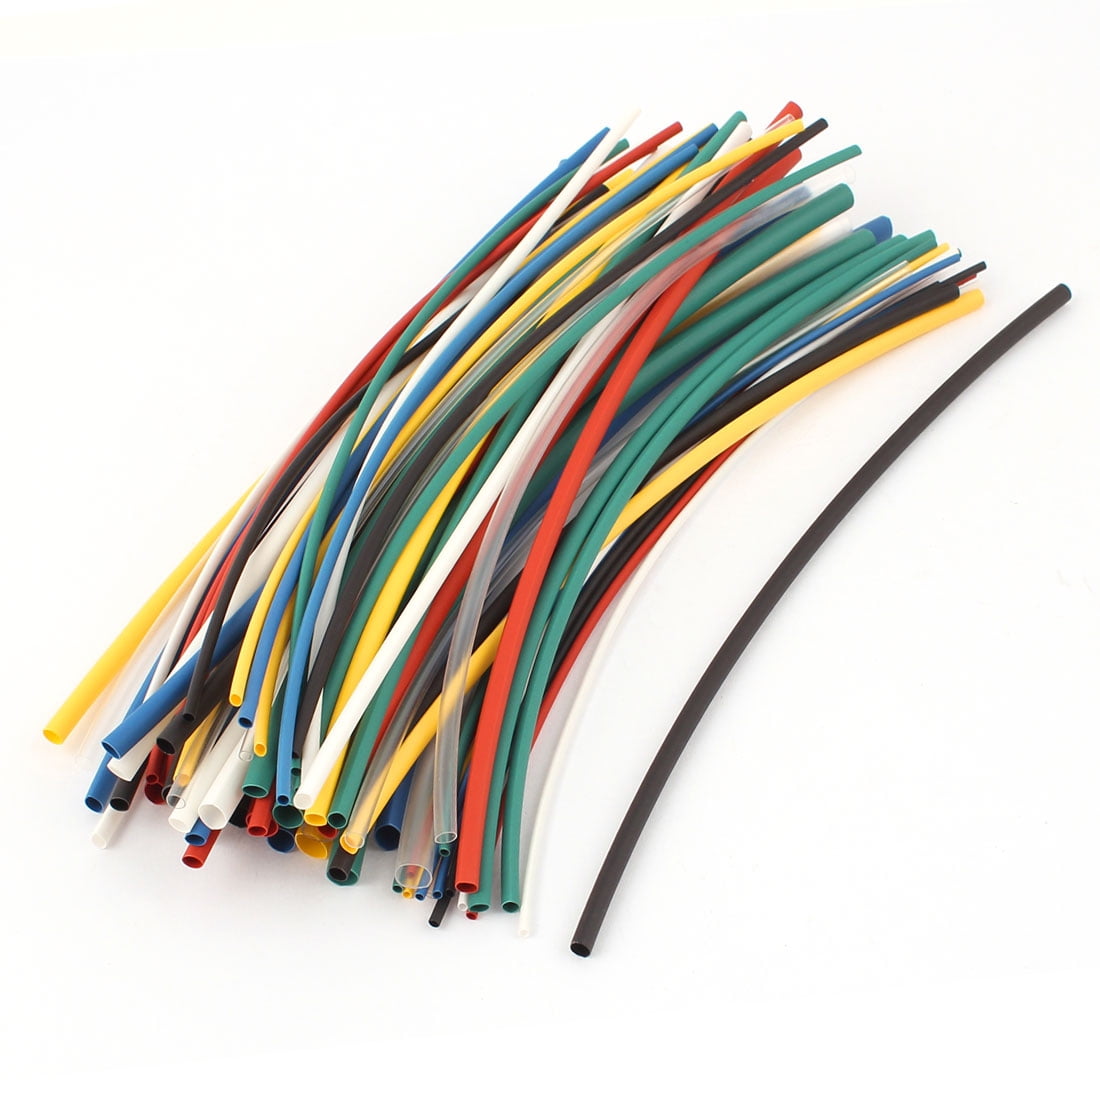 Colour Coded180 Piece Heat Shrink Tubing Wire Sleeves Kit wiring electical tube 